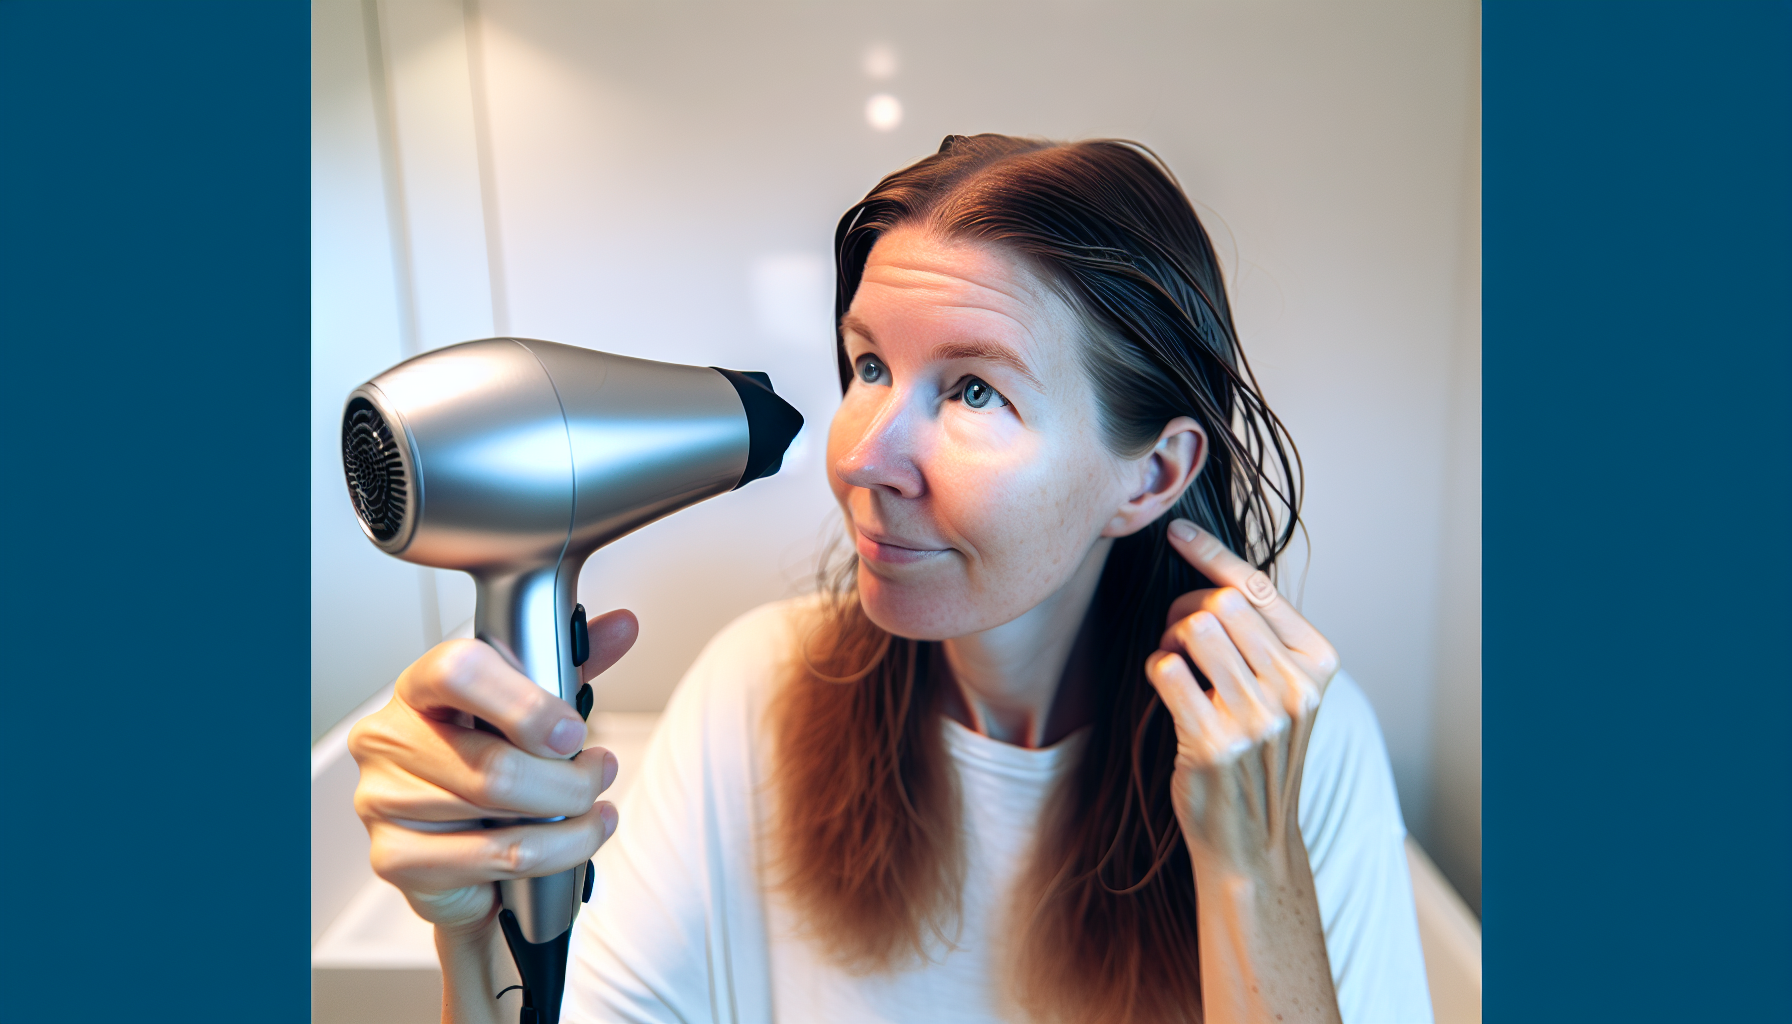 Using blow dryer to evaporate water